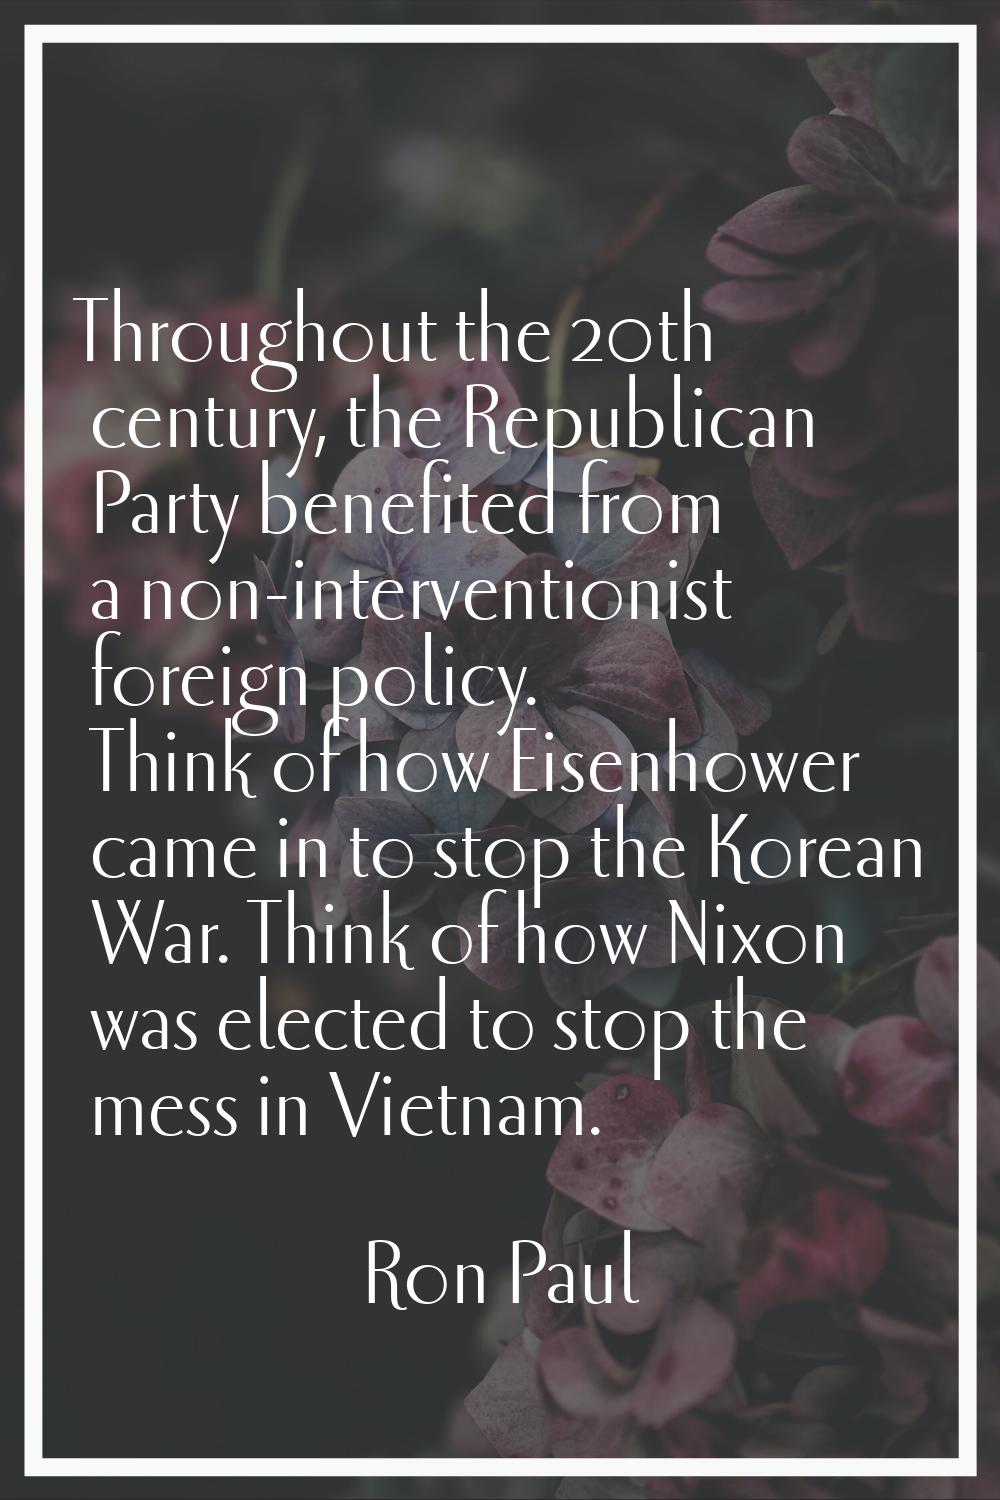 Throughout the 20th century, the Republican Party benefited from a non-interventionist foreign poli